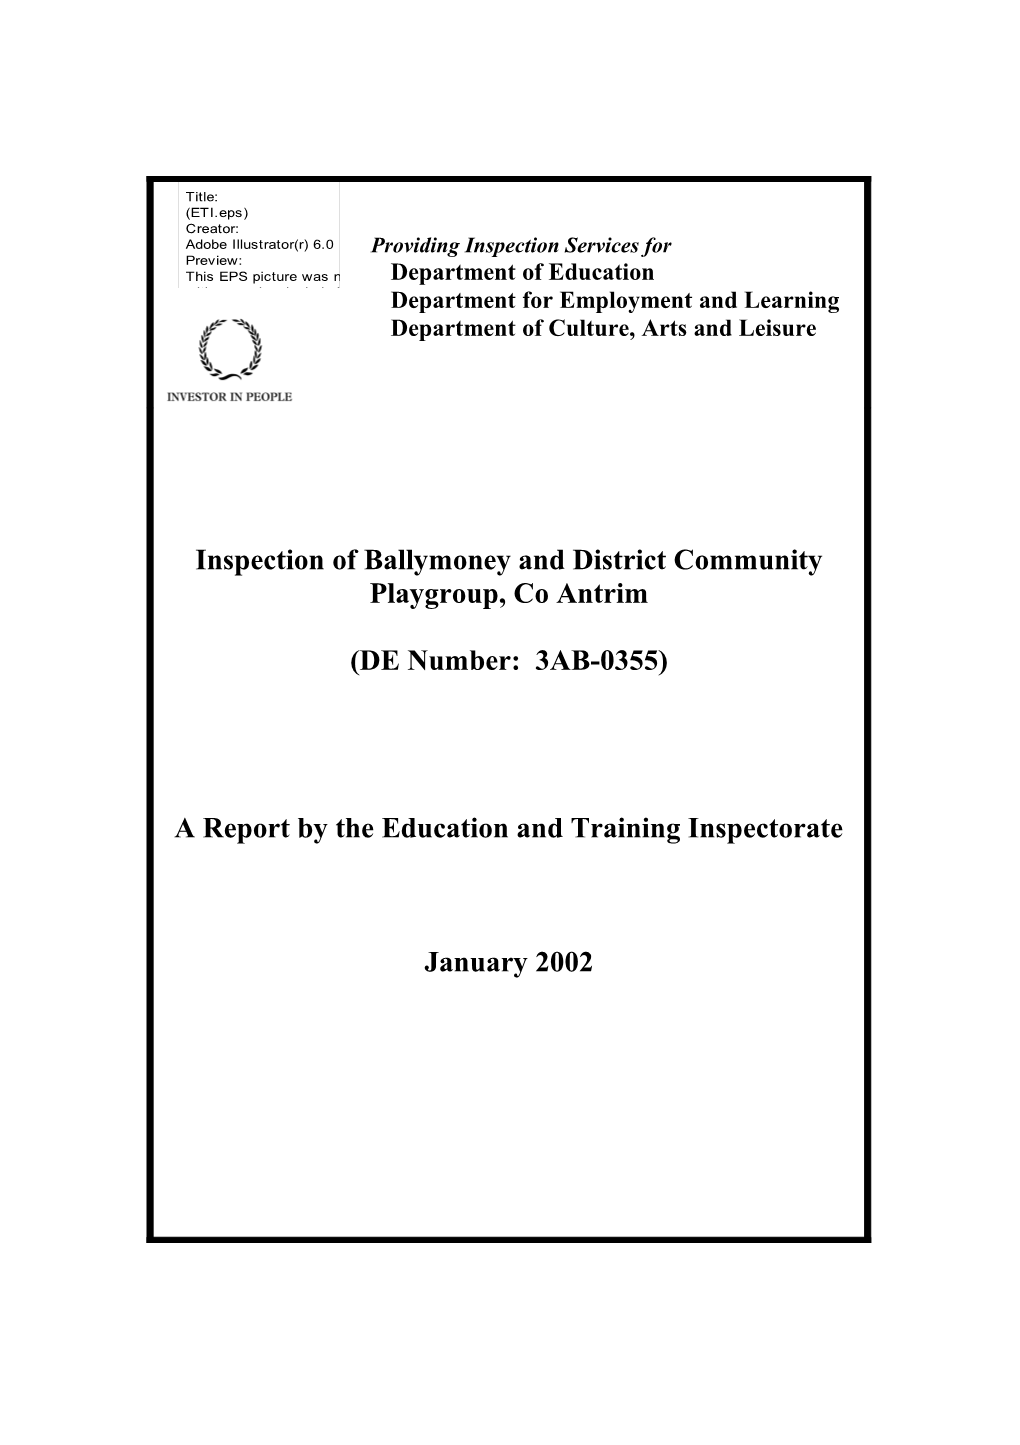 Report on the Inspection of Ballymoney and District Community Playgroup, Ballymoney